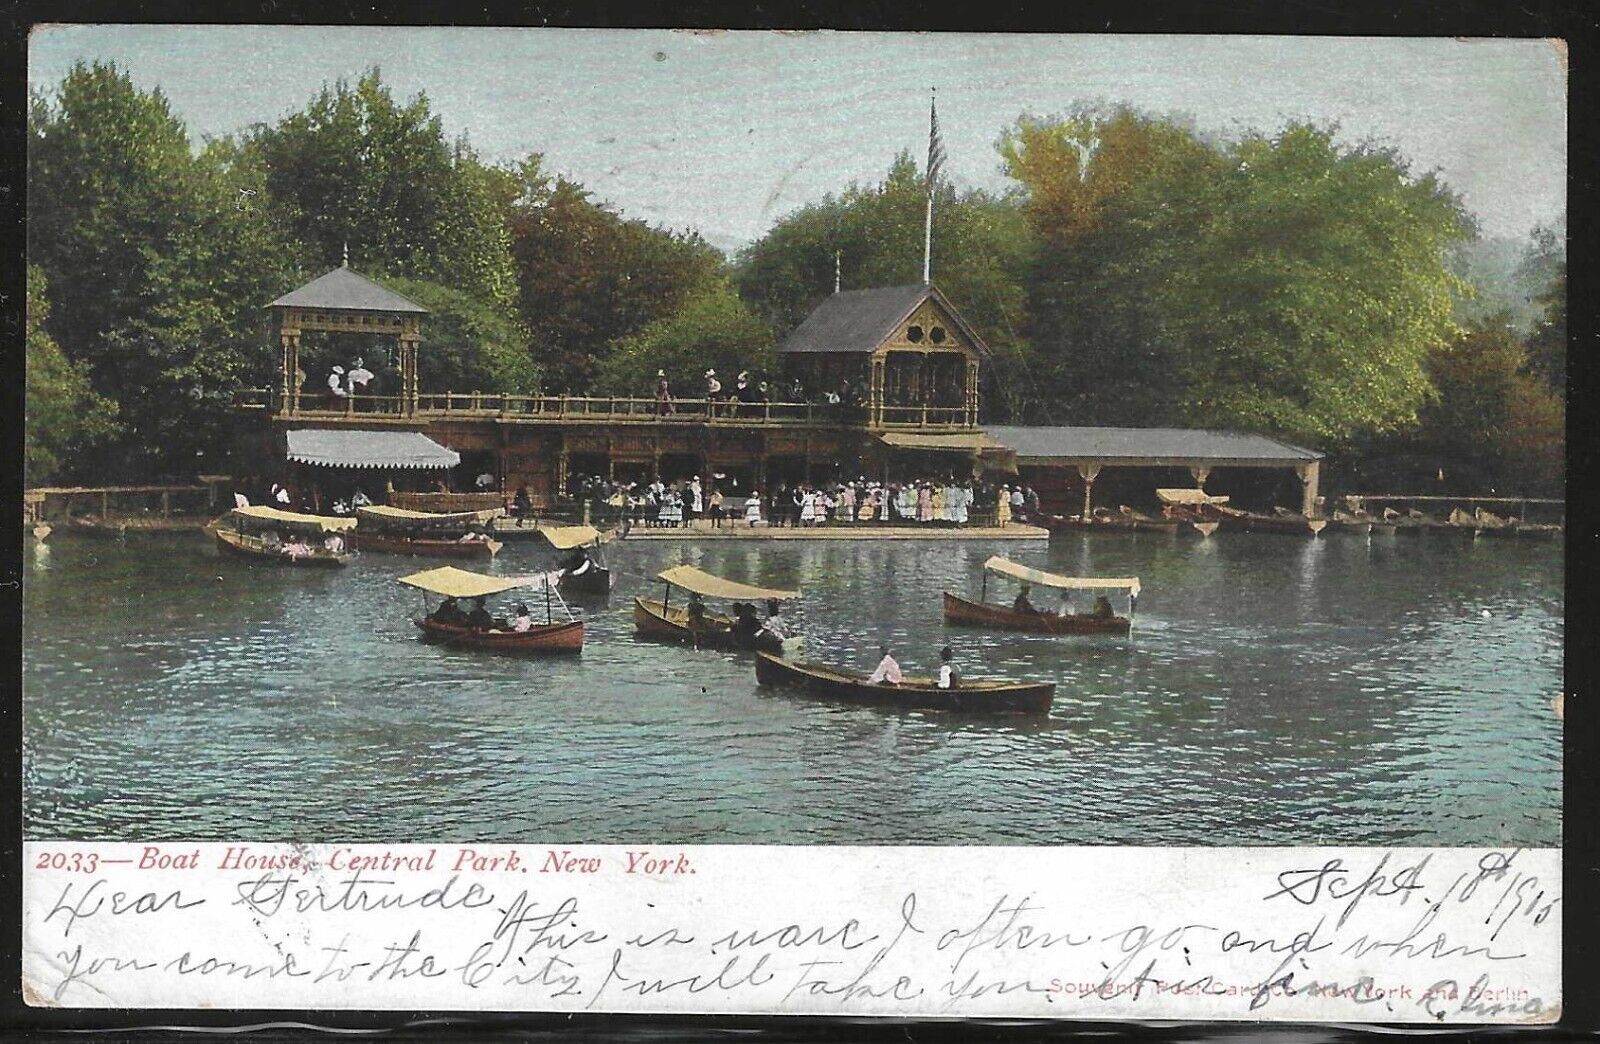 Boat House, Central Park, New York, Early Postcard, Used in 1905